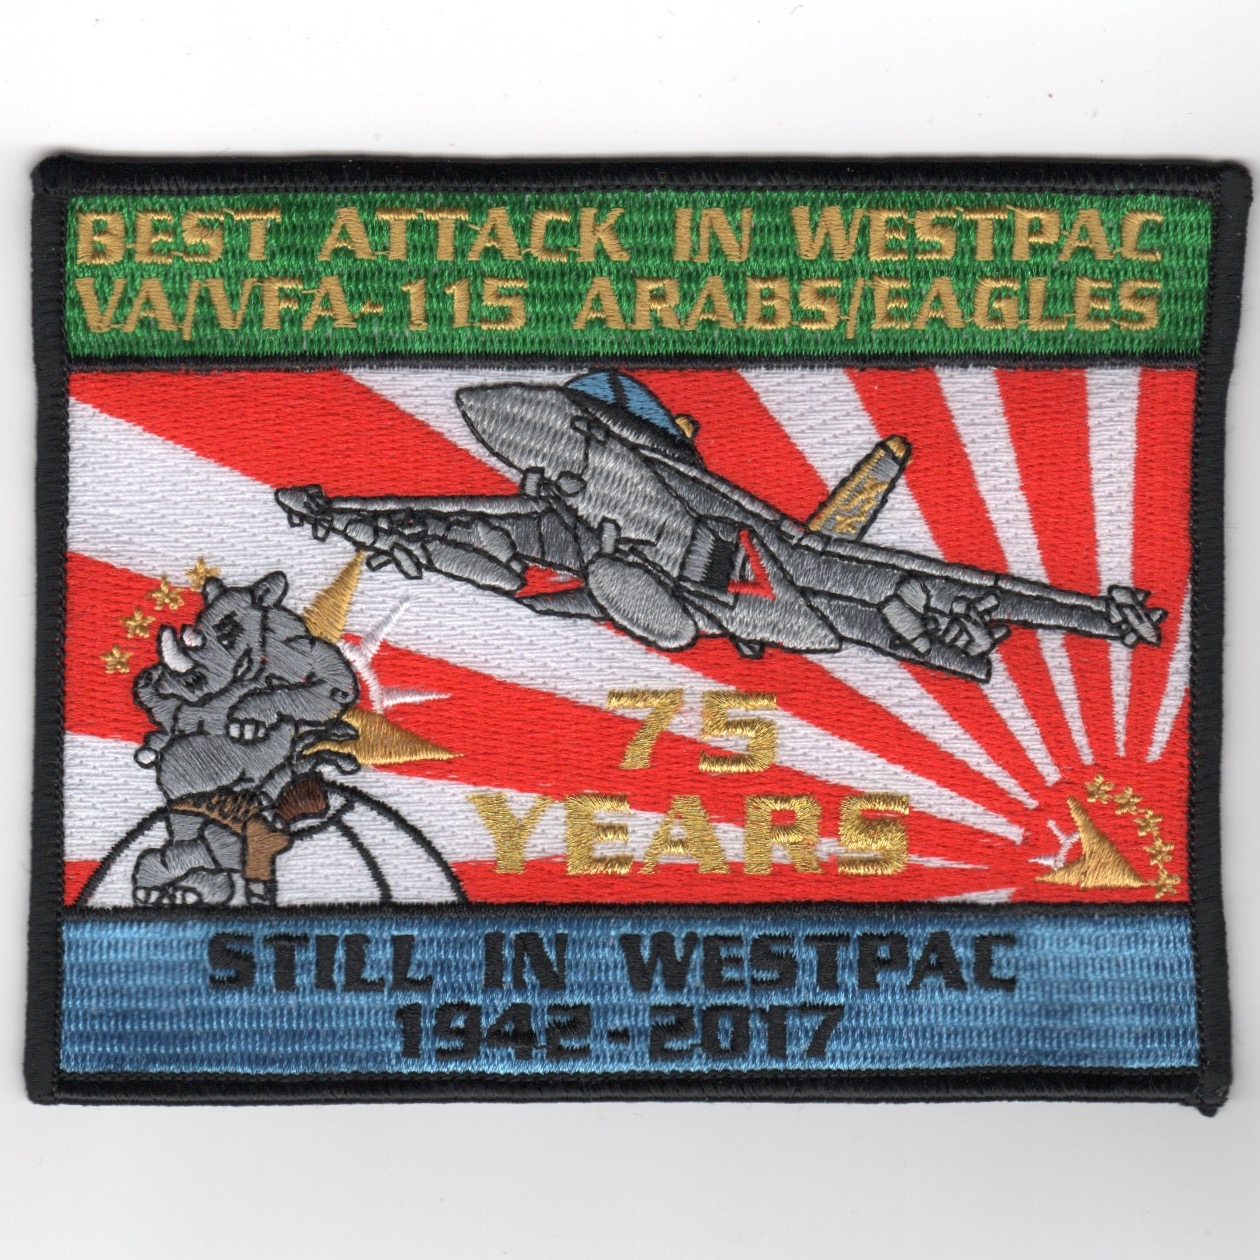 VFA-115 '75 YEARS' Commemorative Patch